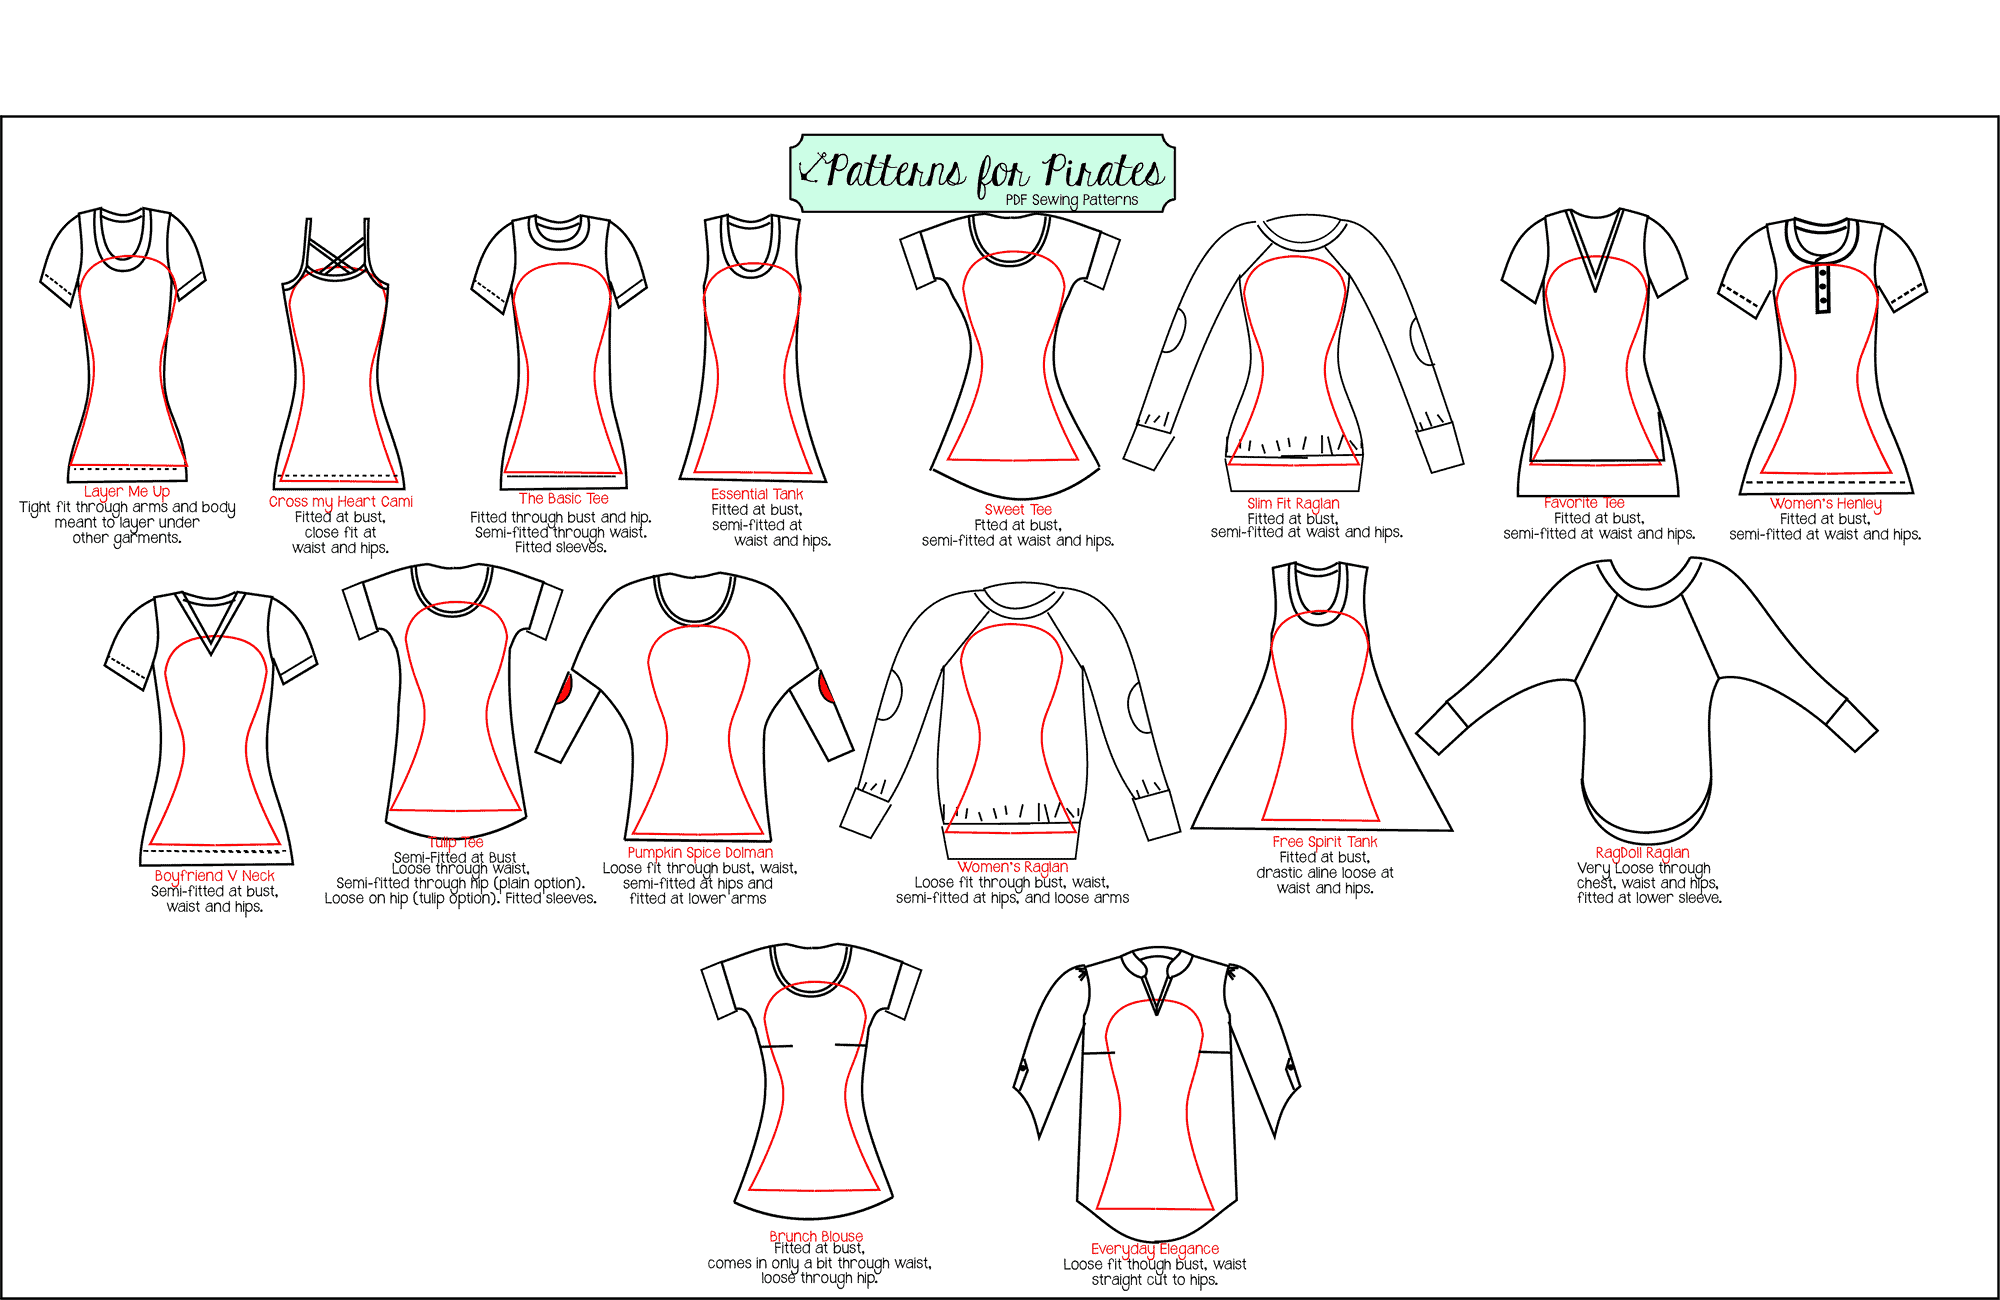 P4P Shirt fits Explained - Patterns for Pirates